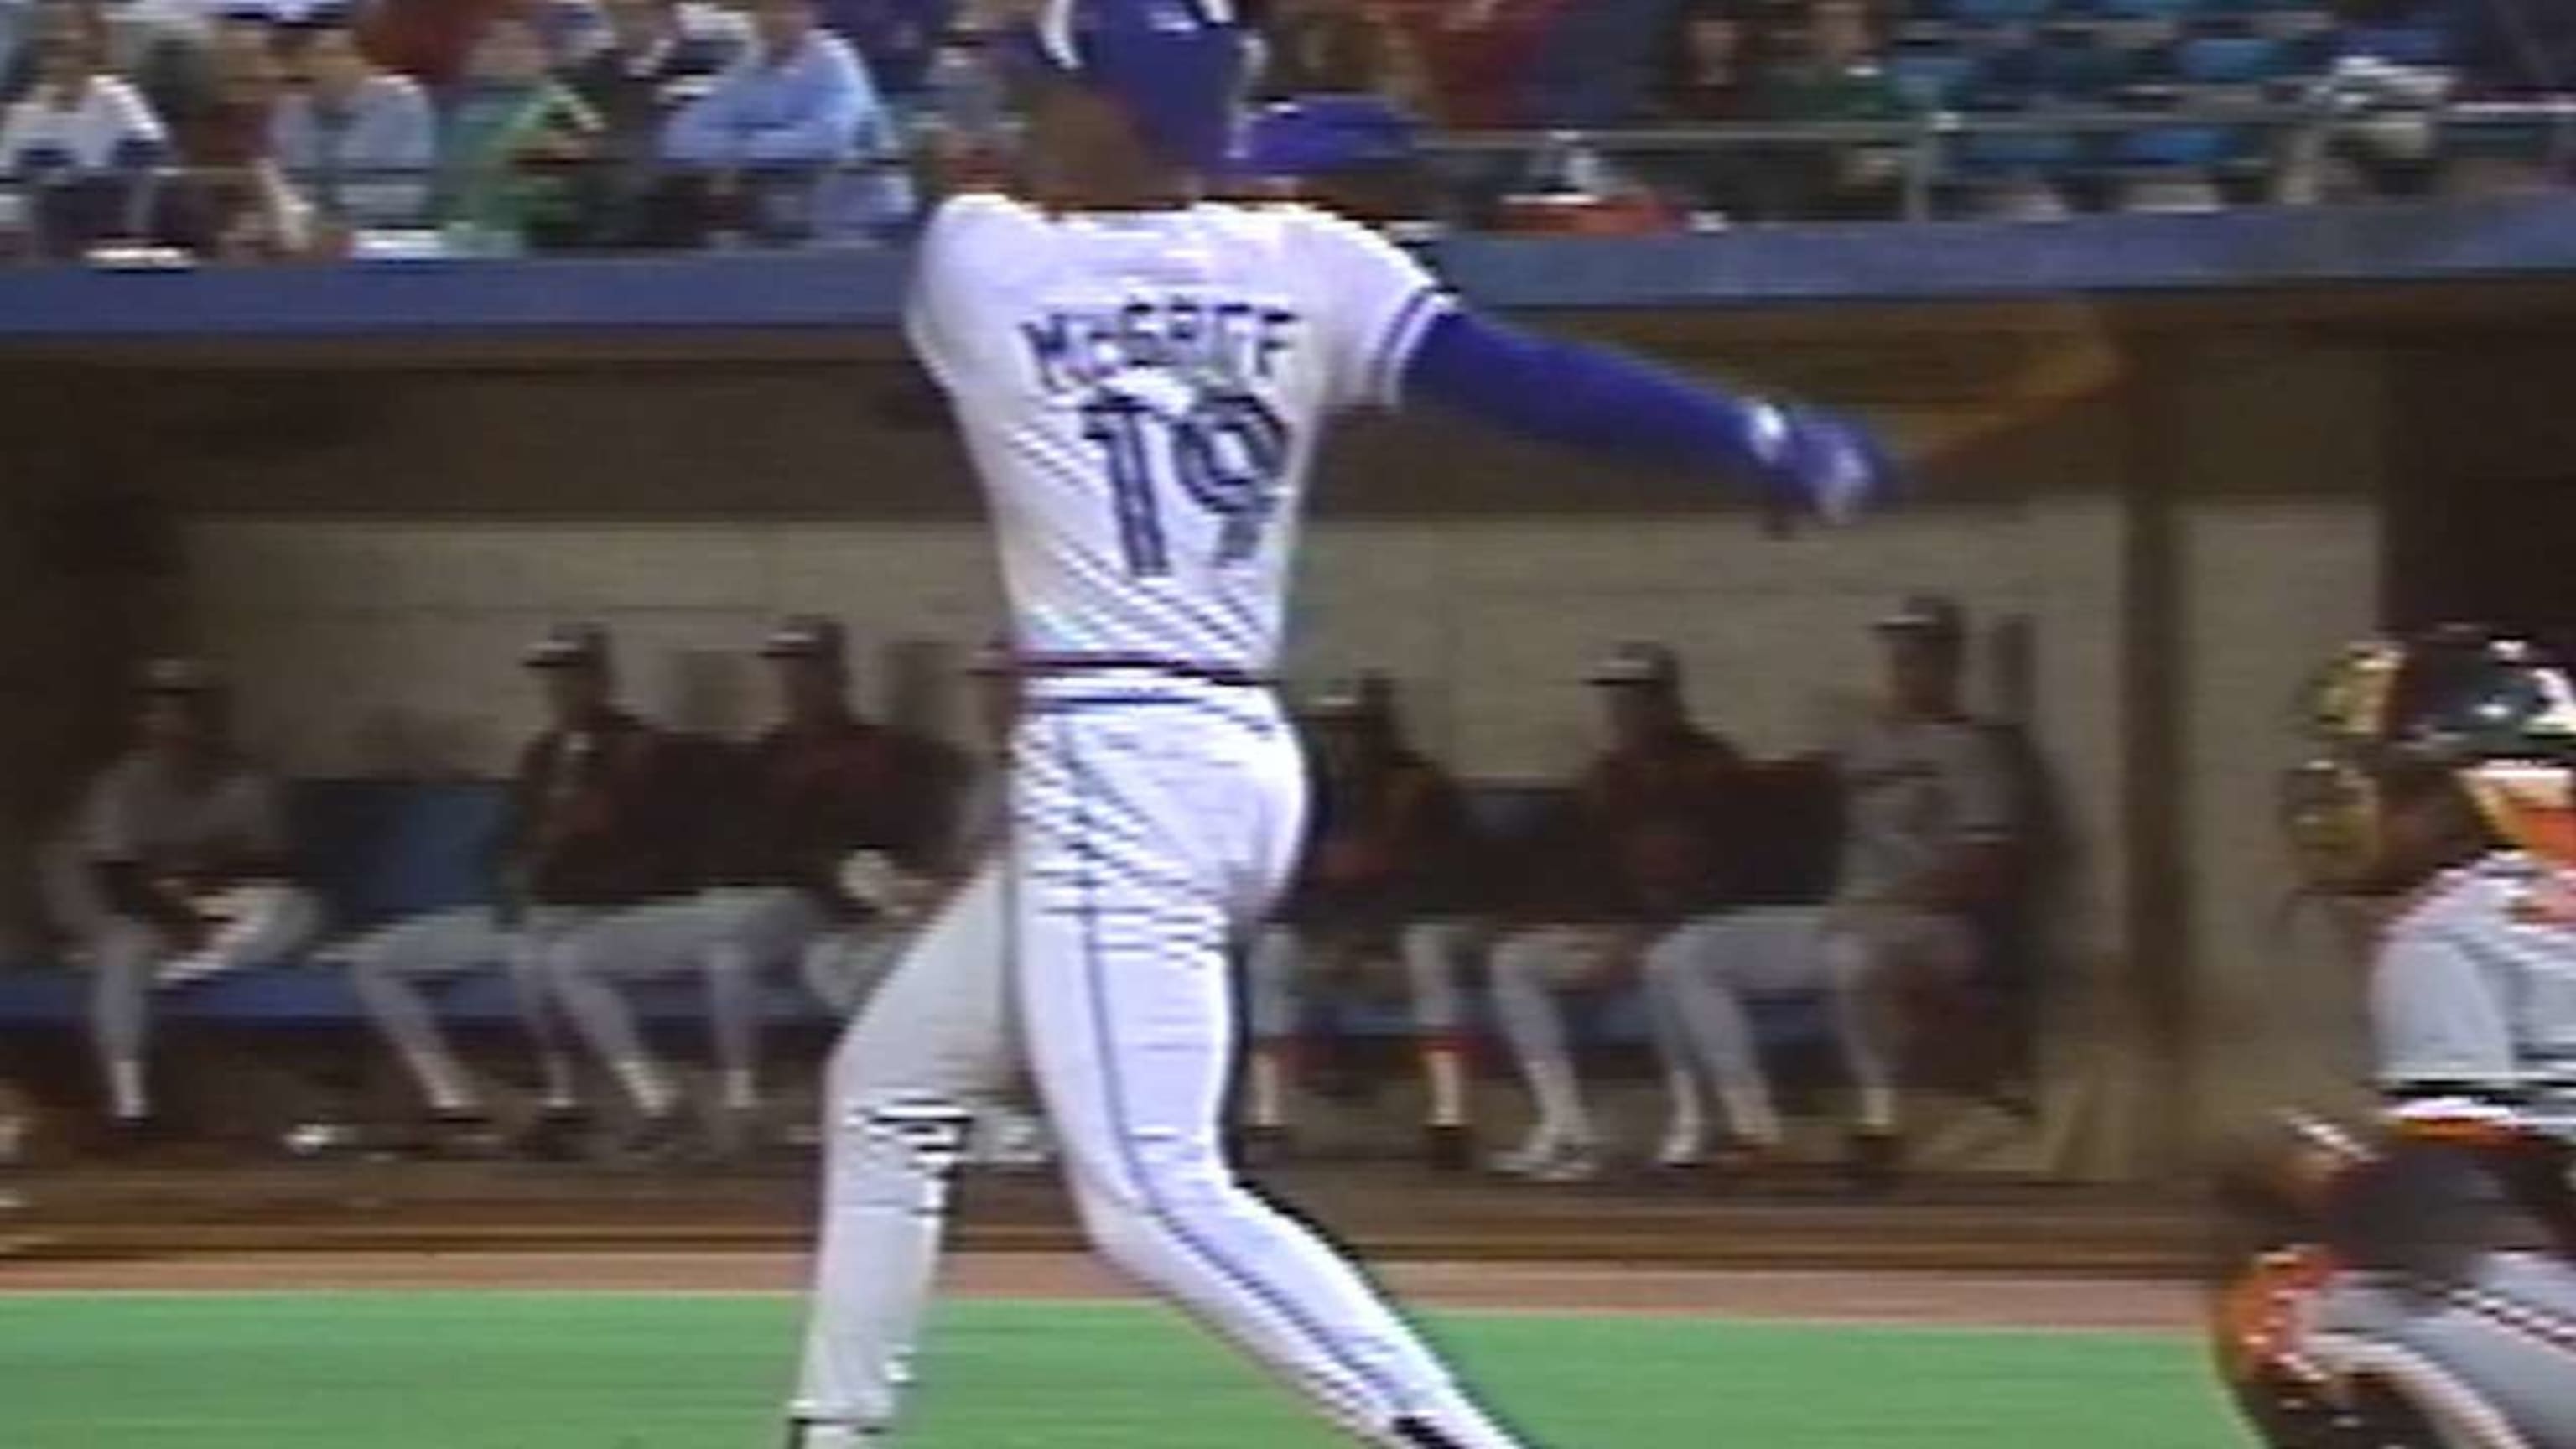 Classic Player Profile: Fred McGriff - DRaysBay